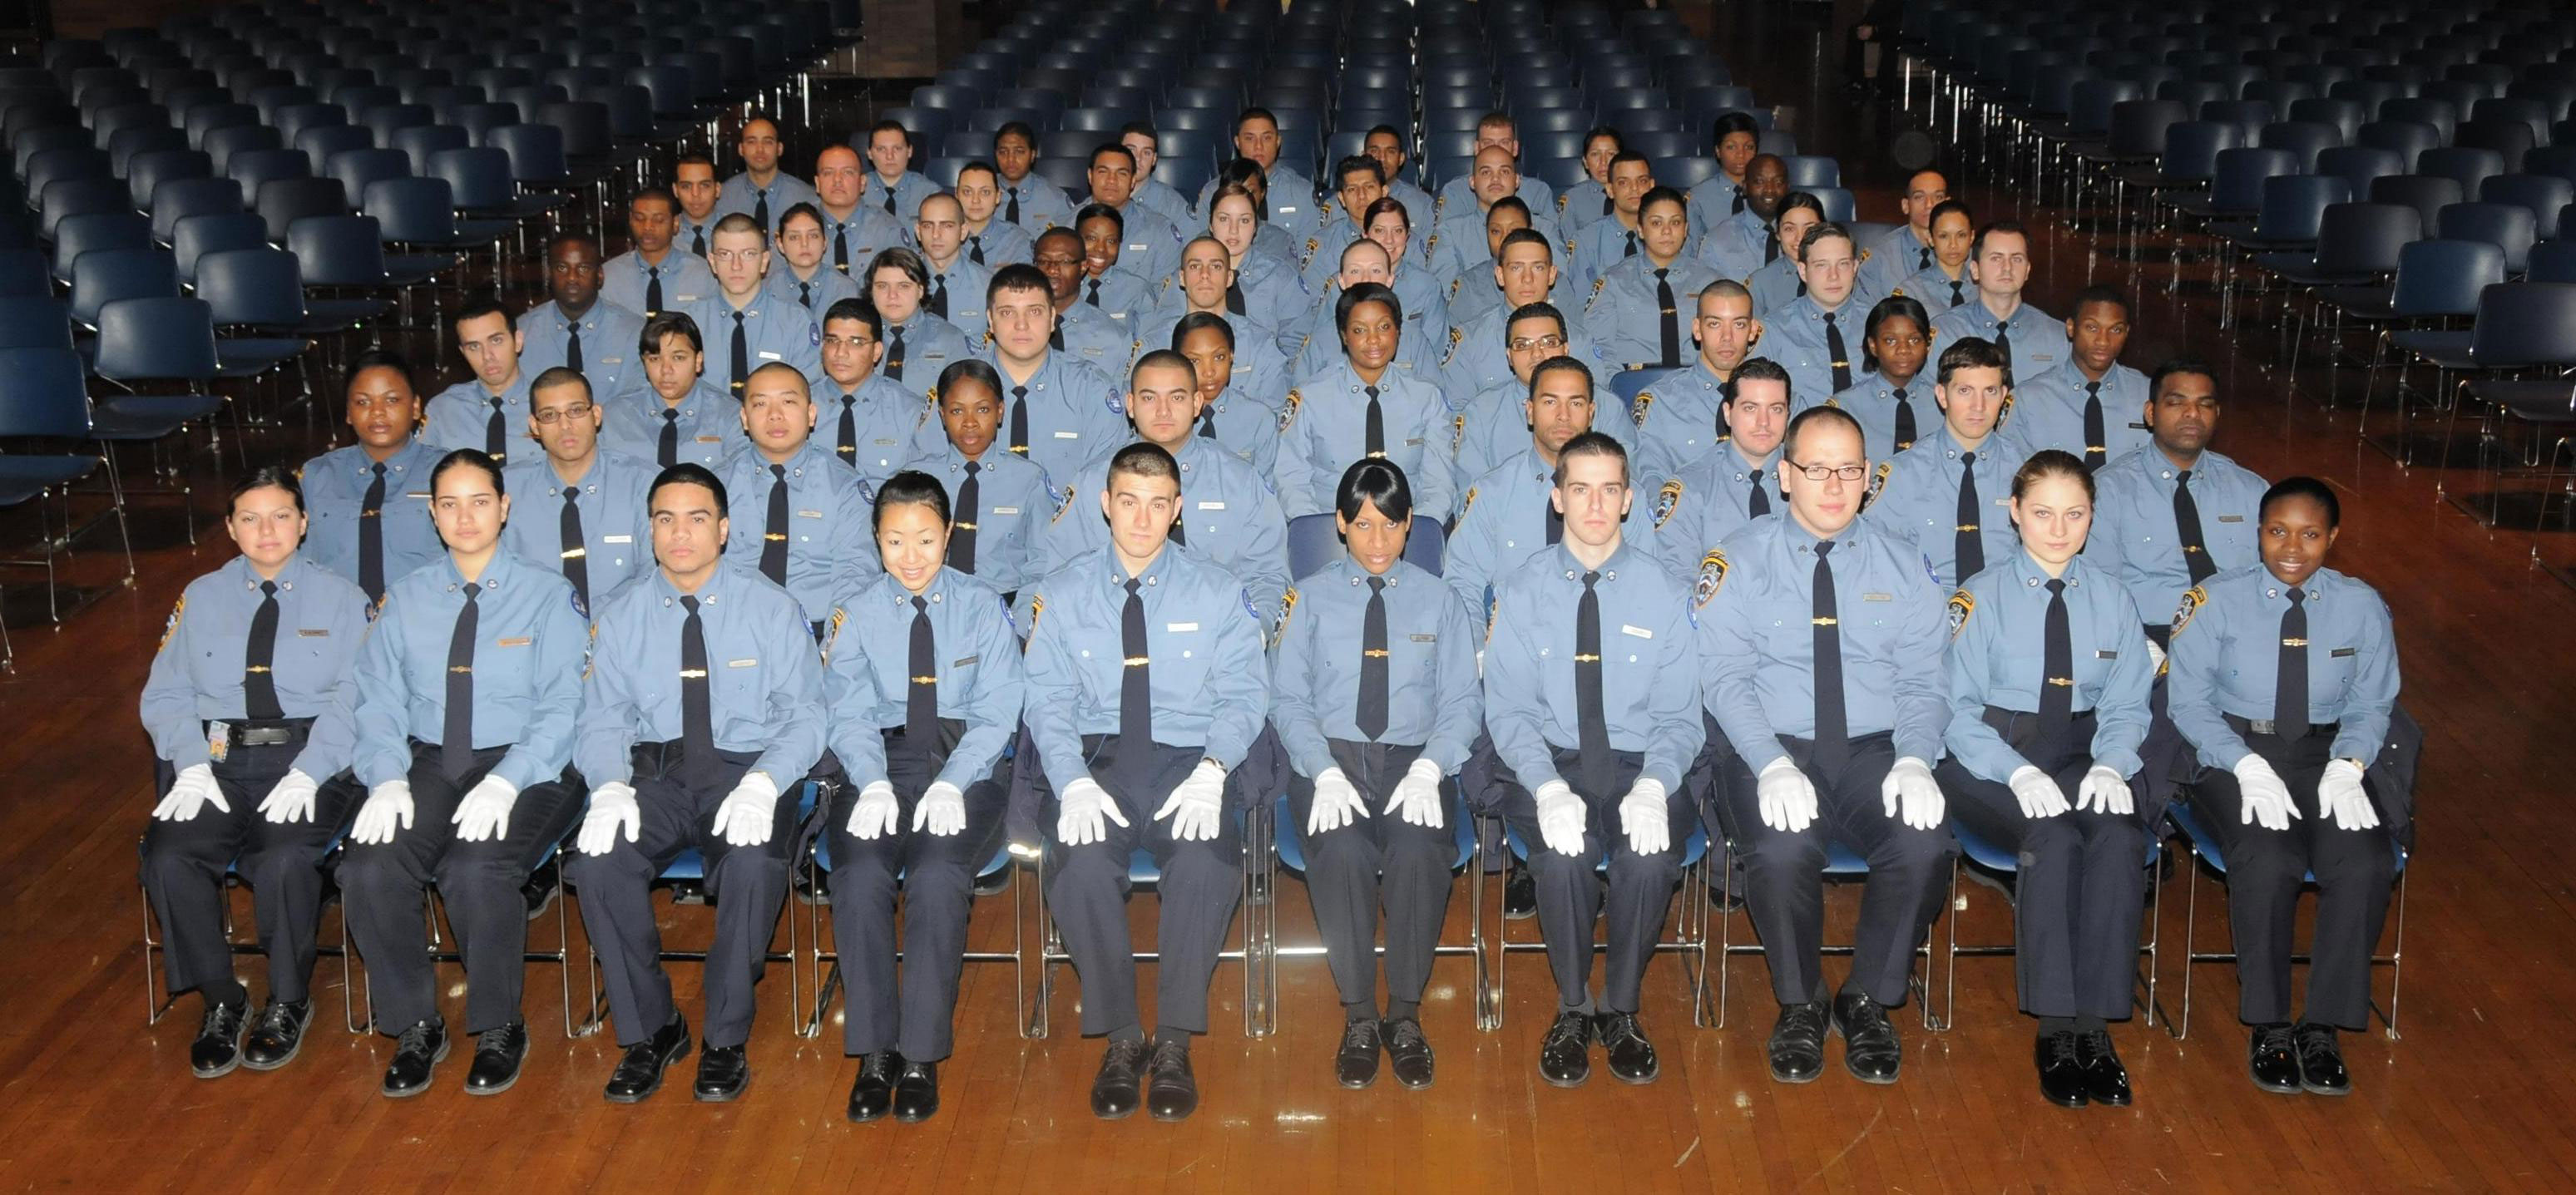 The New York City Police Department Cadet